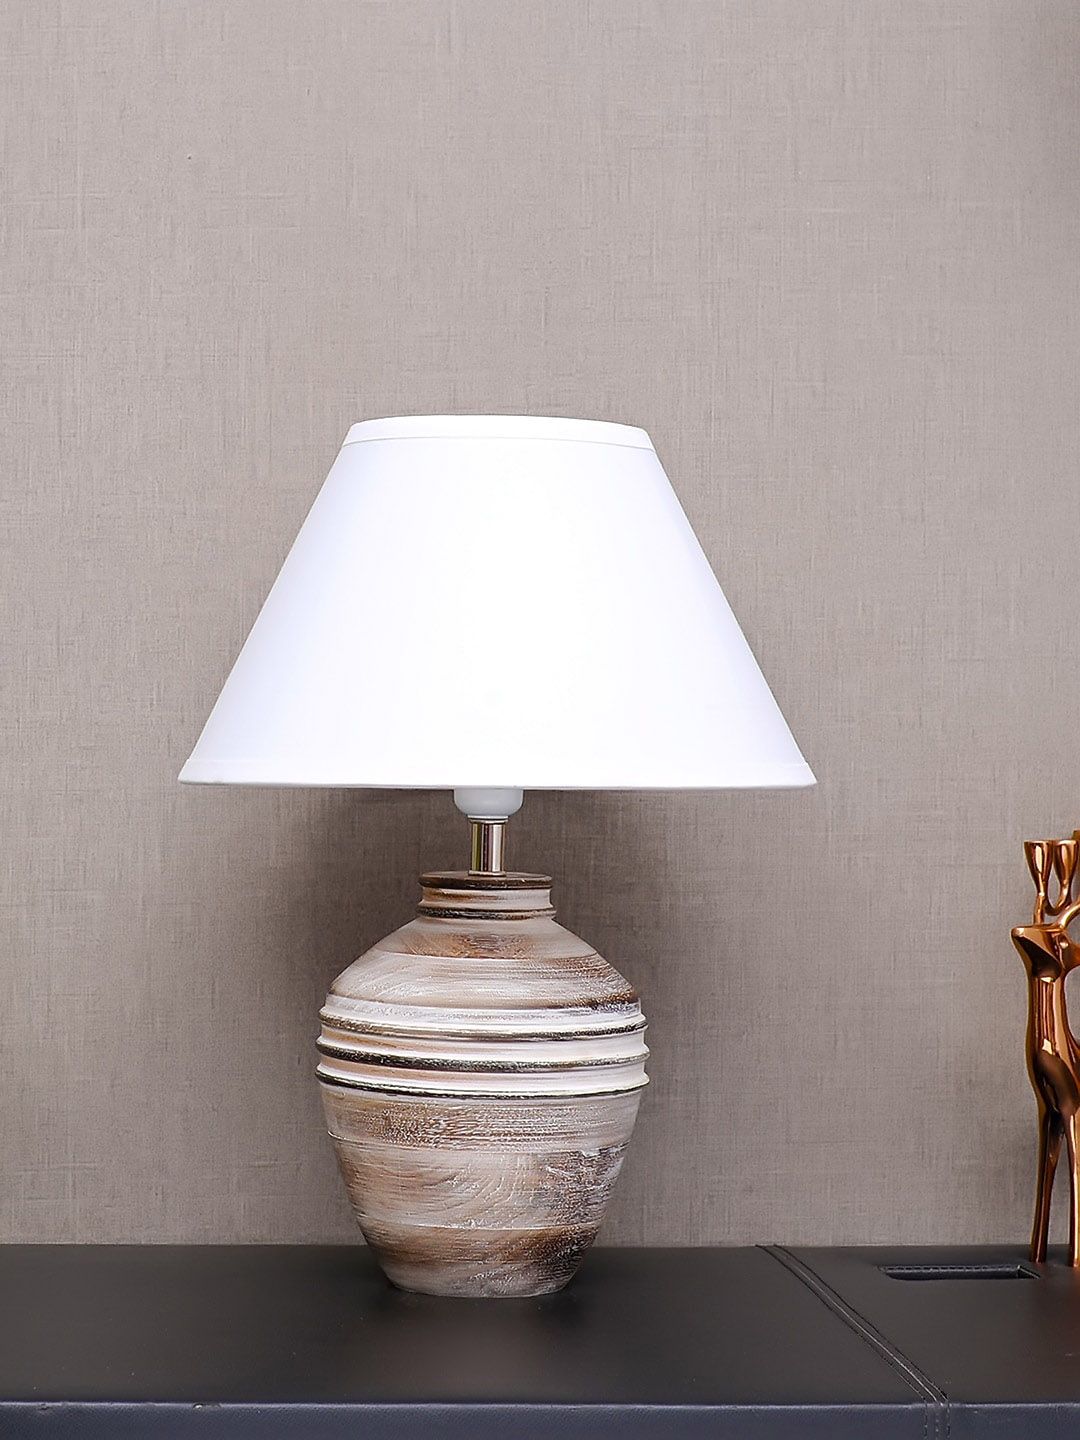 THE LIGHT STORE White & Brown Self-Design Table Lamp With White Shade Price in India